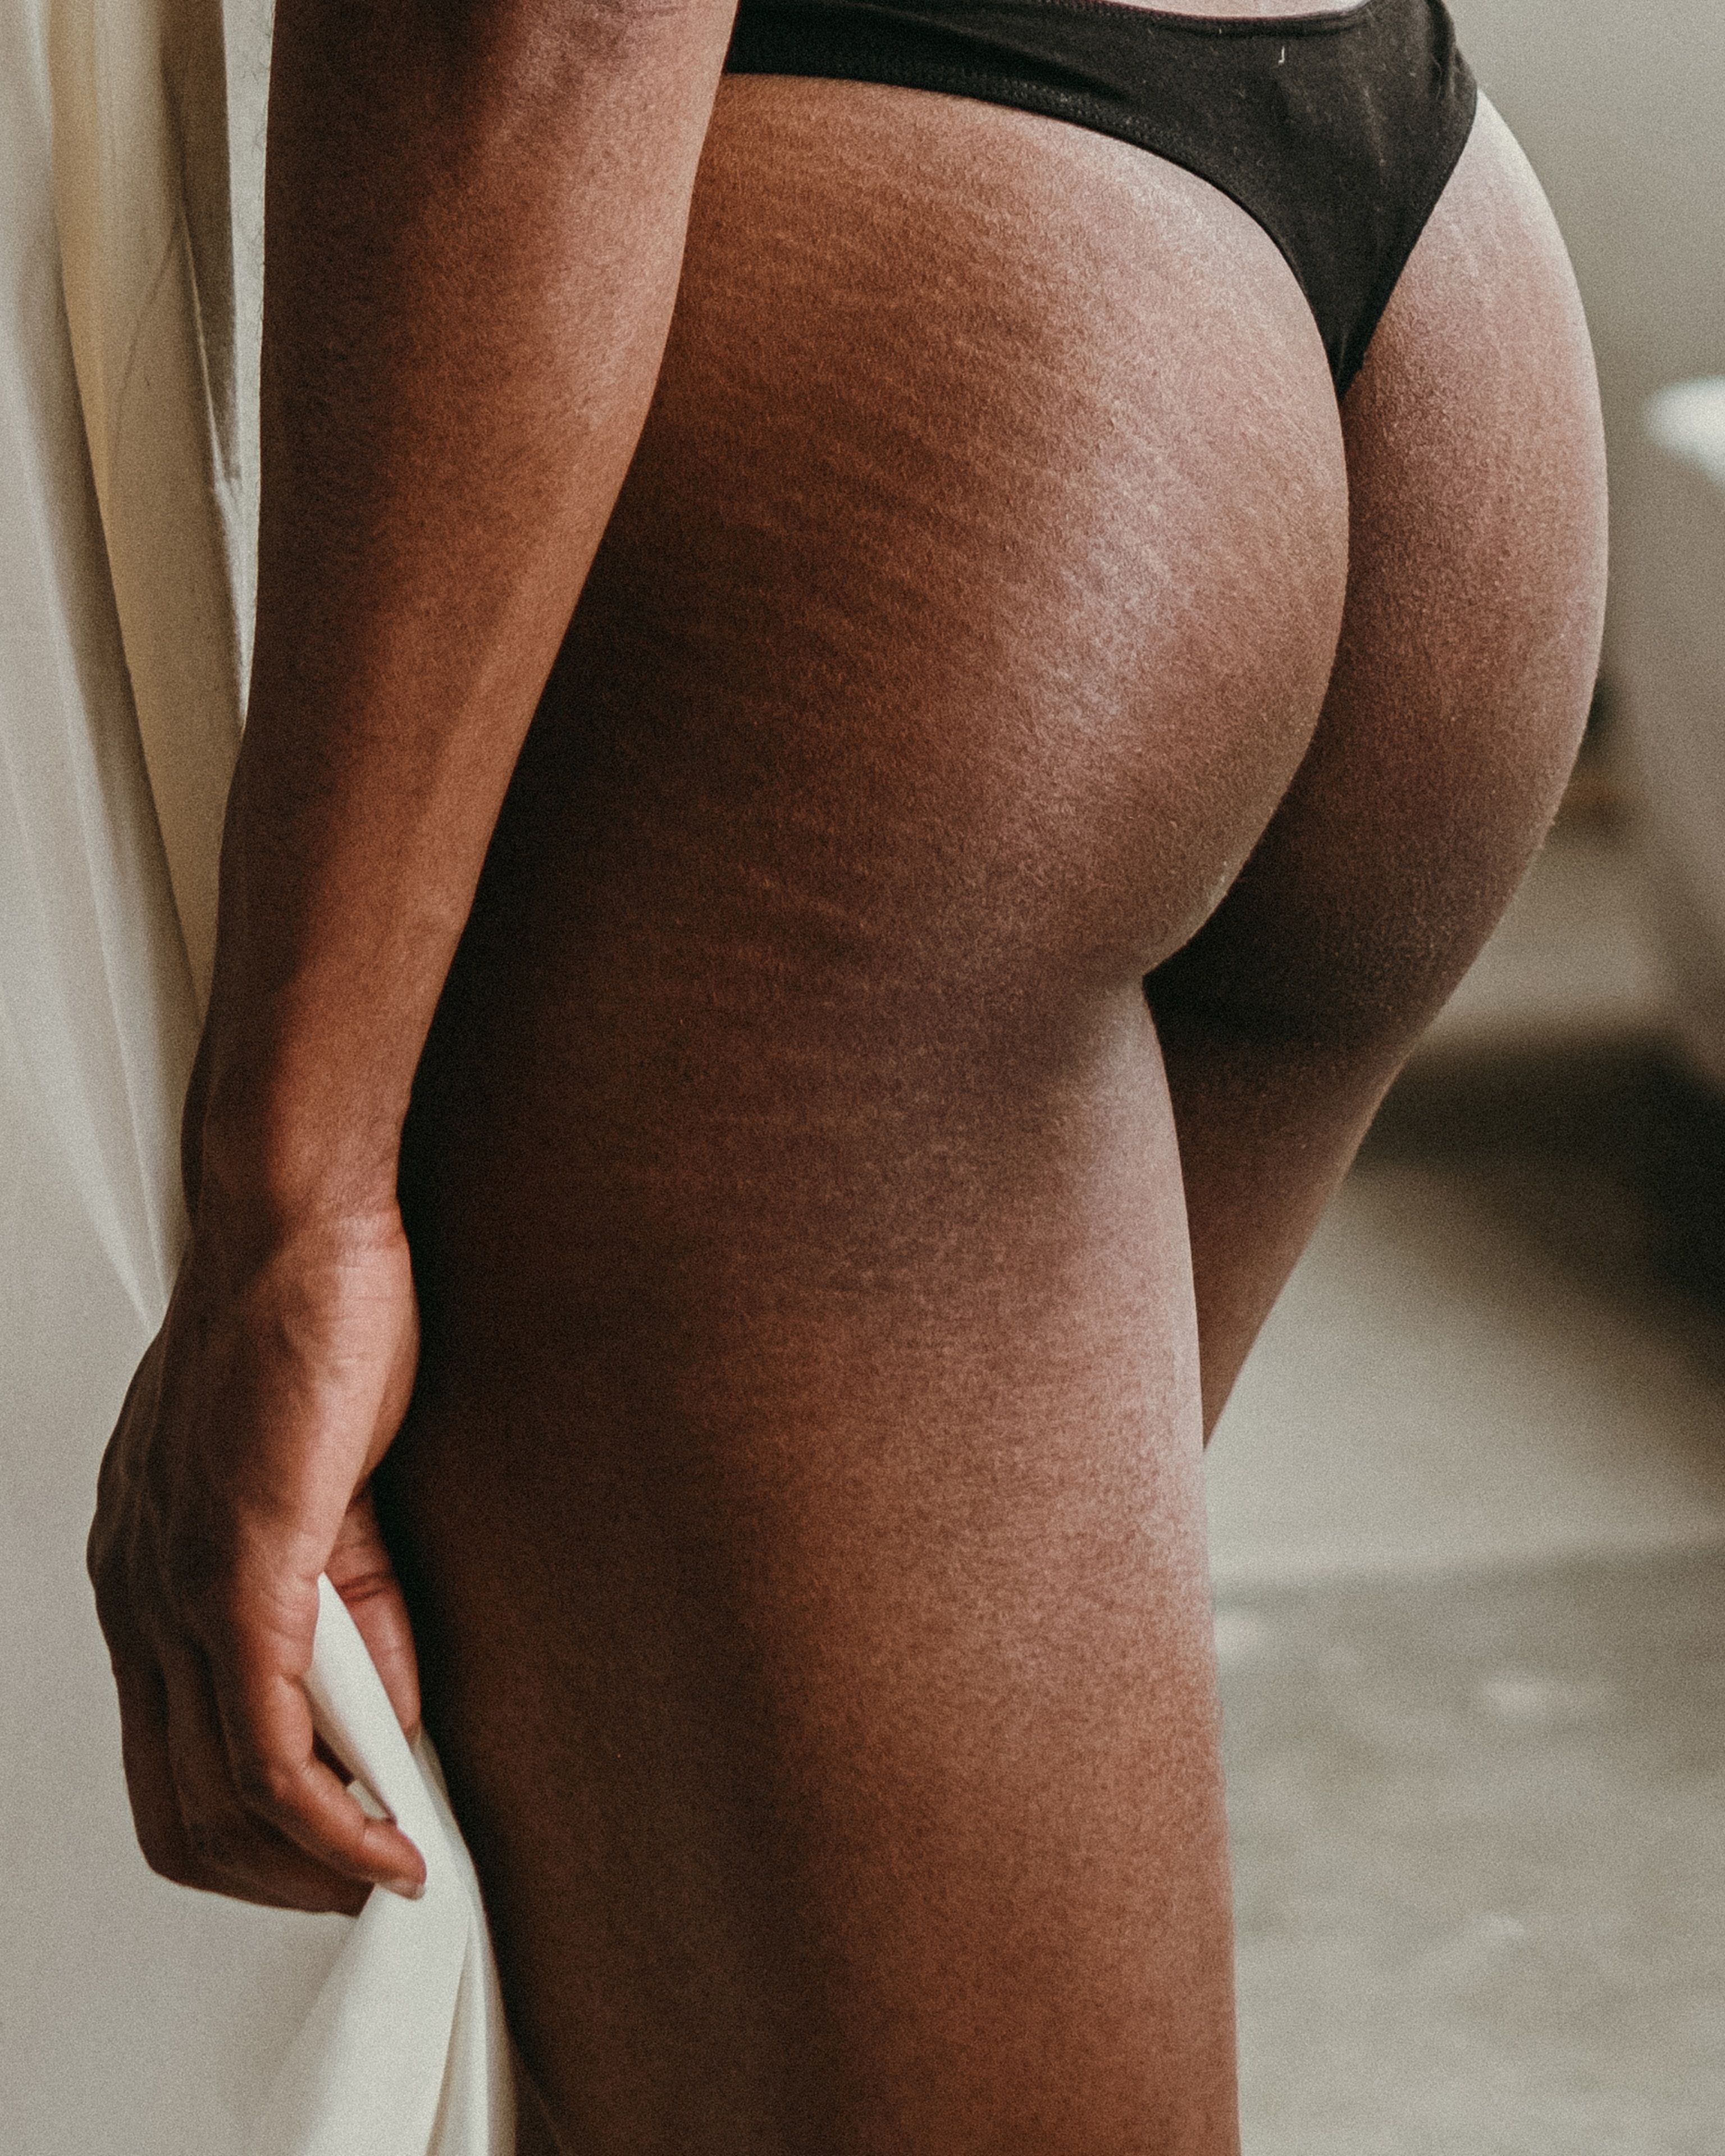 Do Stretch Marks From Puberty Go Away?